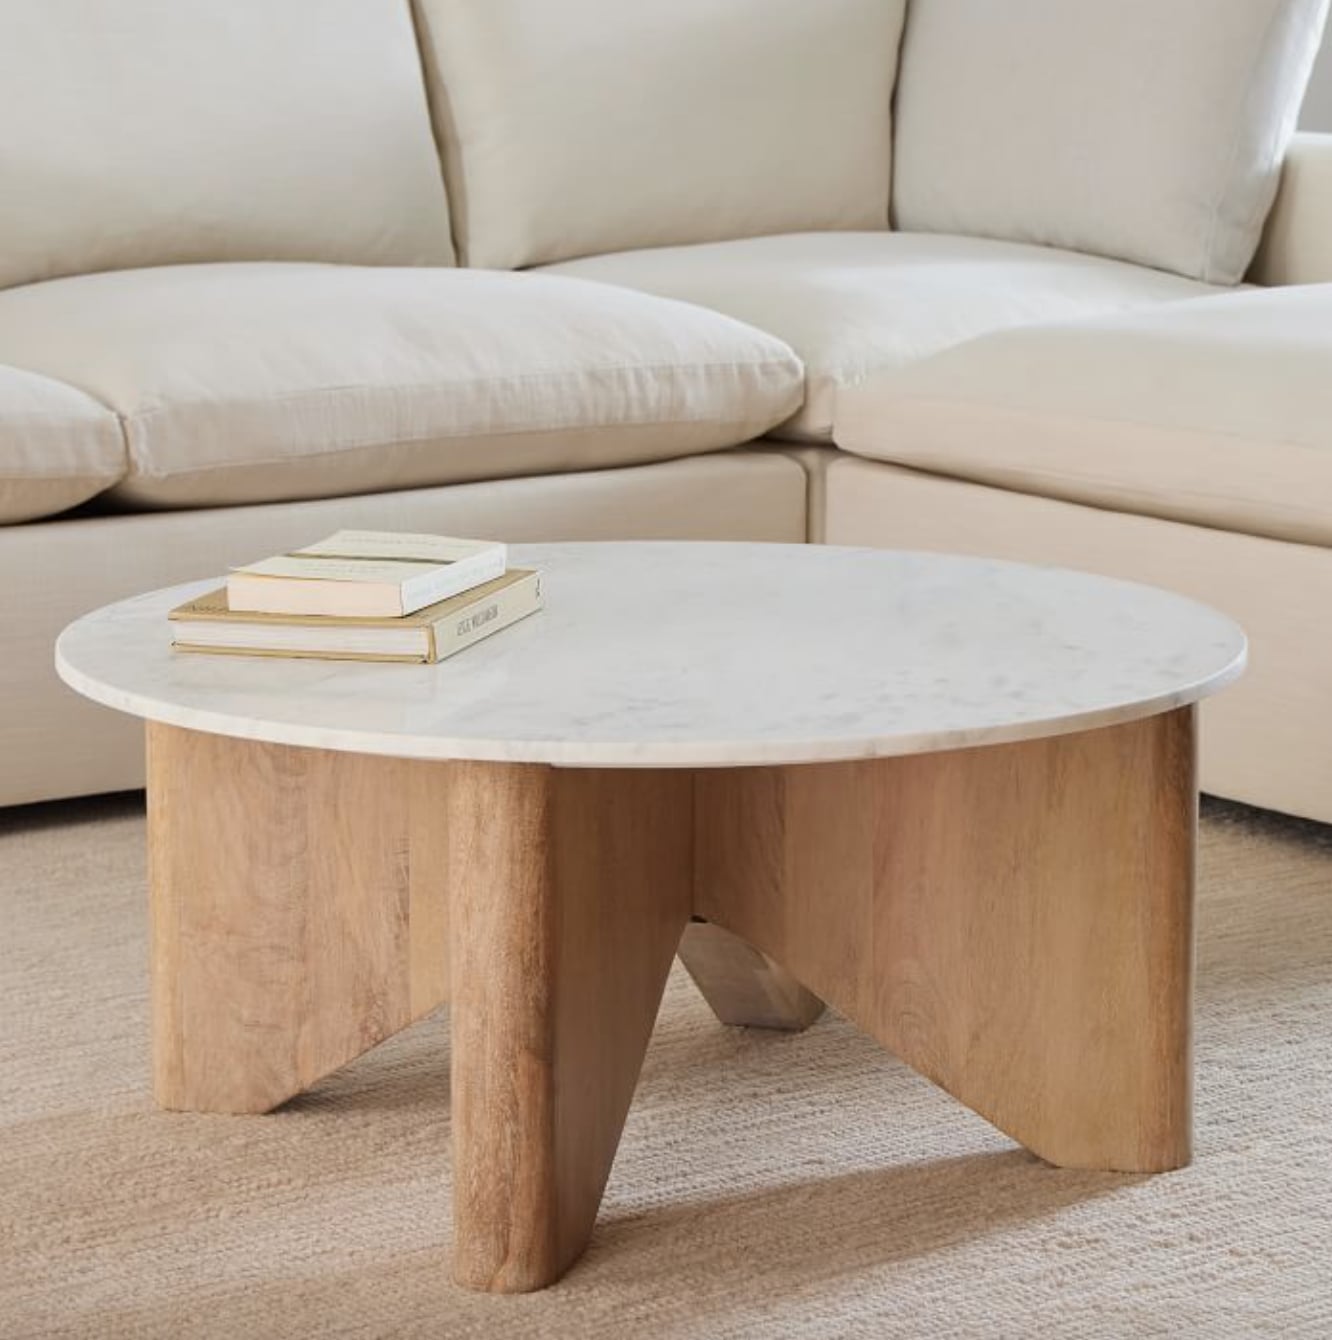 Kro trofast kobling Best and Most Stylish Coffee Tables 2022 | POPSUGAR Home